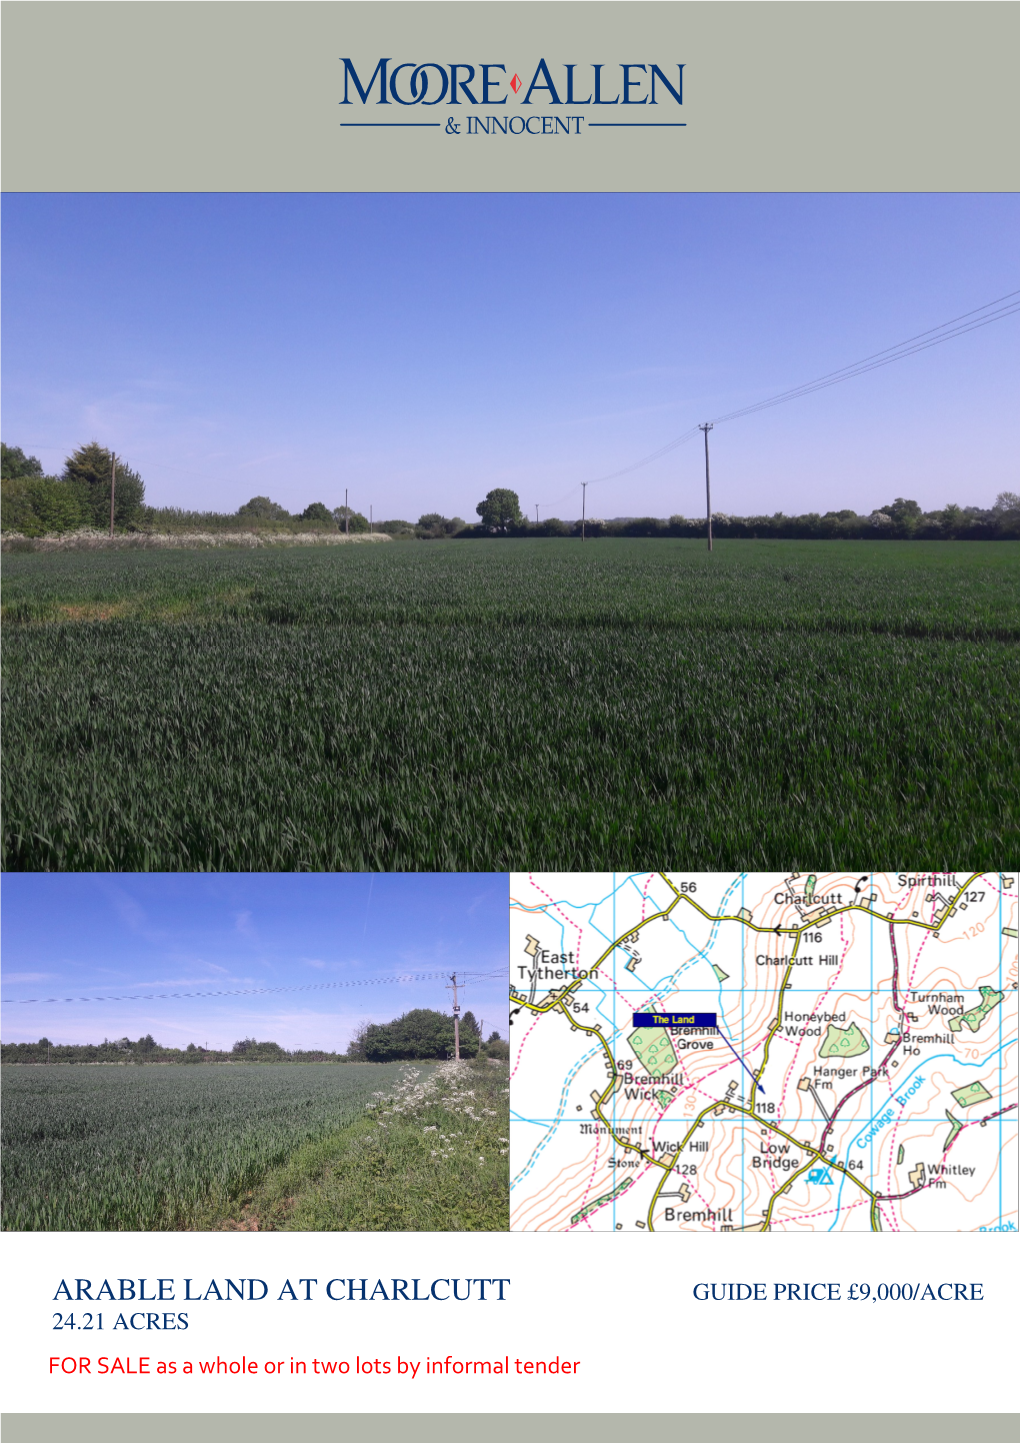 ARABLE LAND at CHARLCUTT GUIDE PRICE £9,000/ACRE 24.21 ACRES for SALE As a Whole Or in Two Lots by Informal Tender